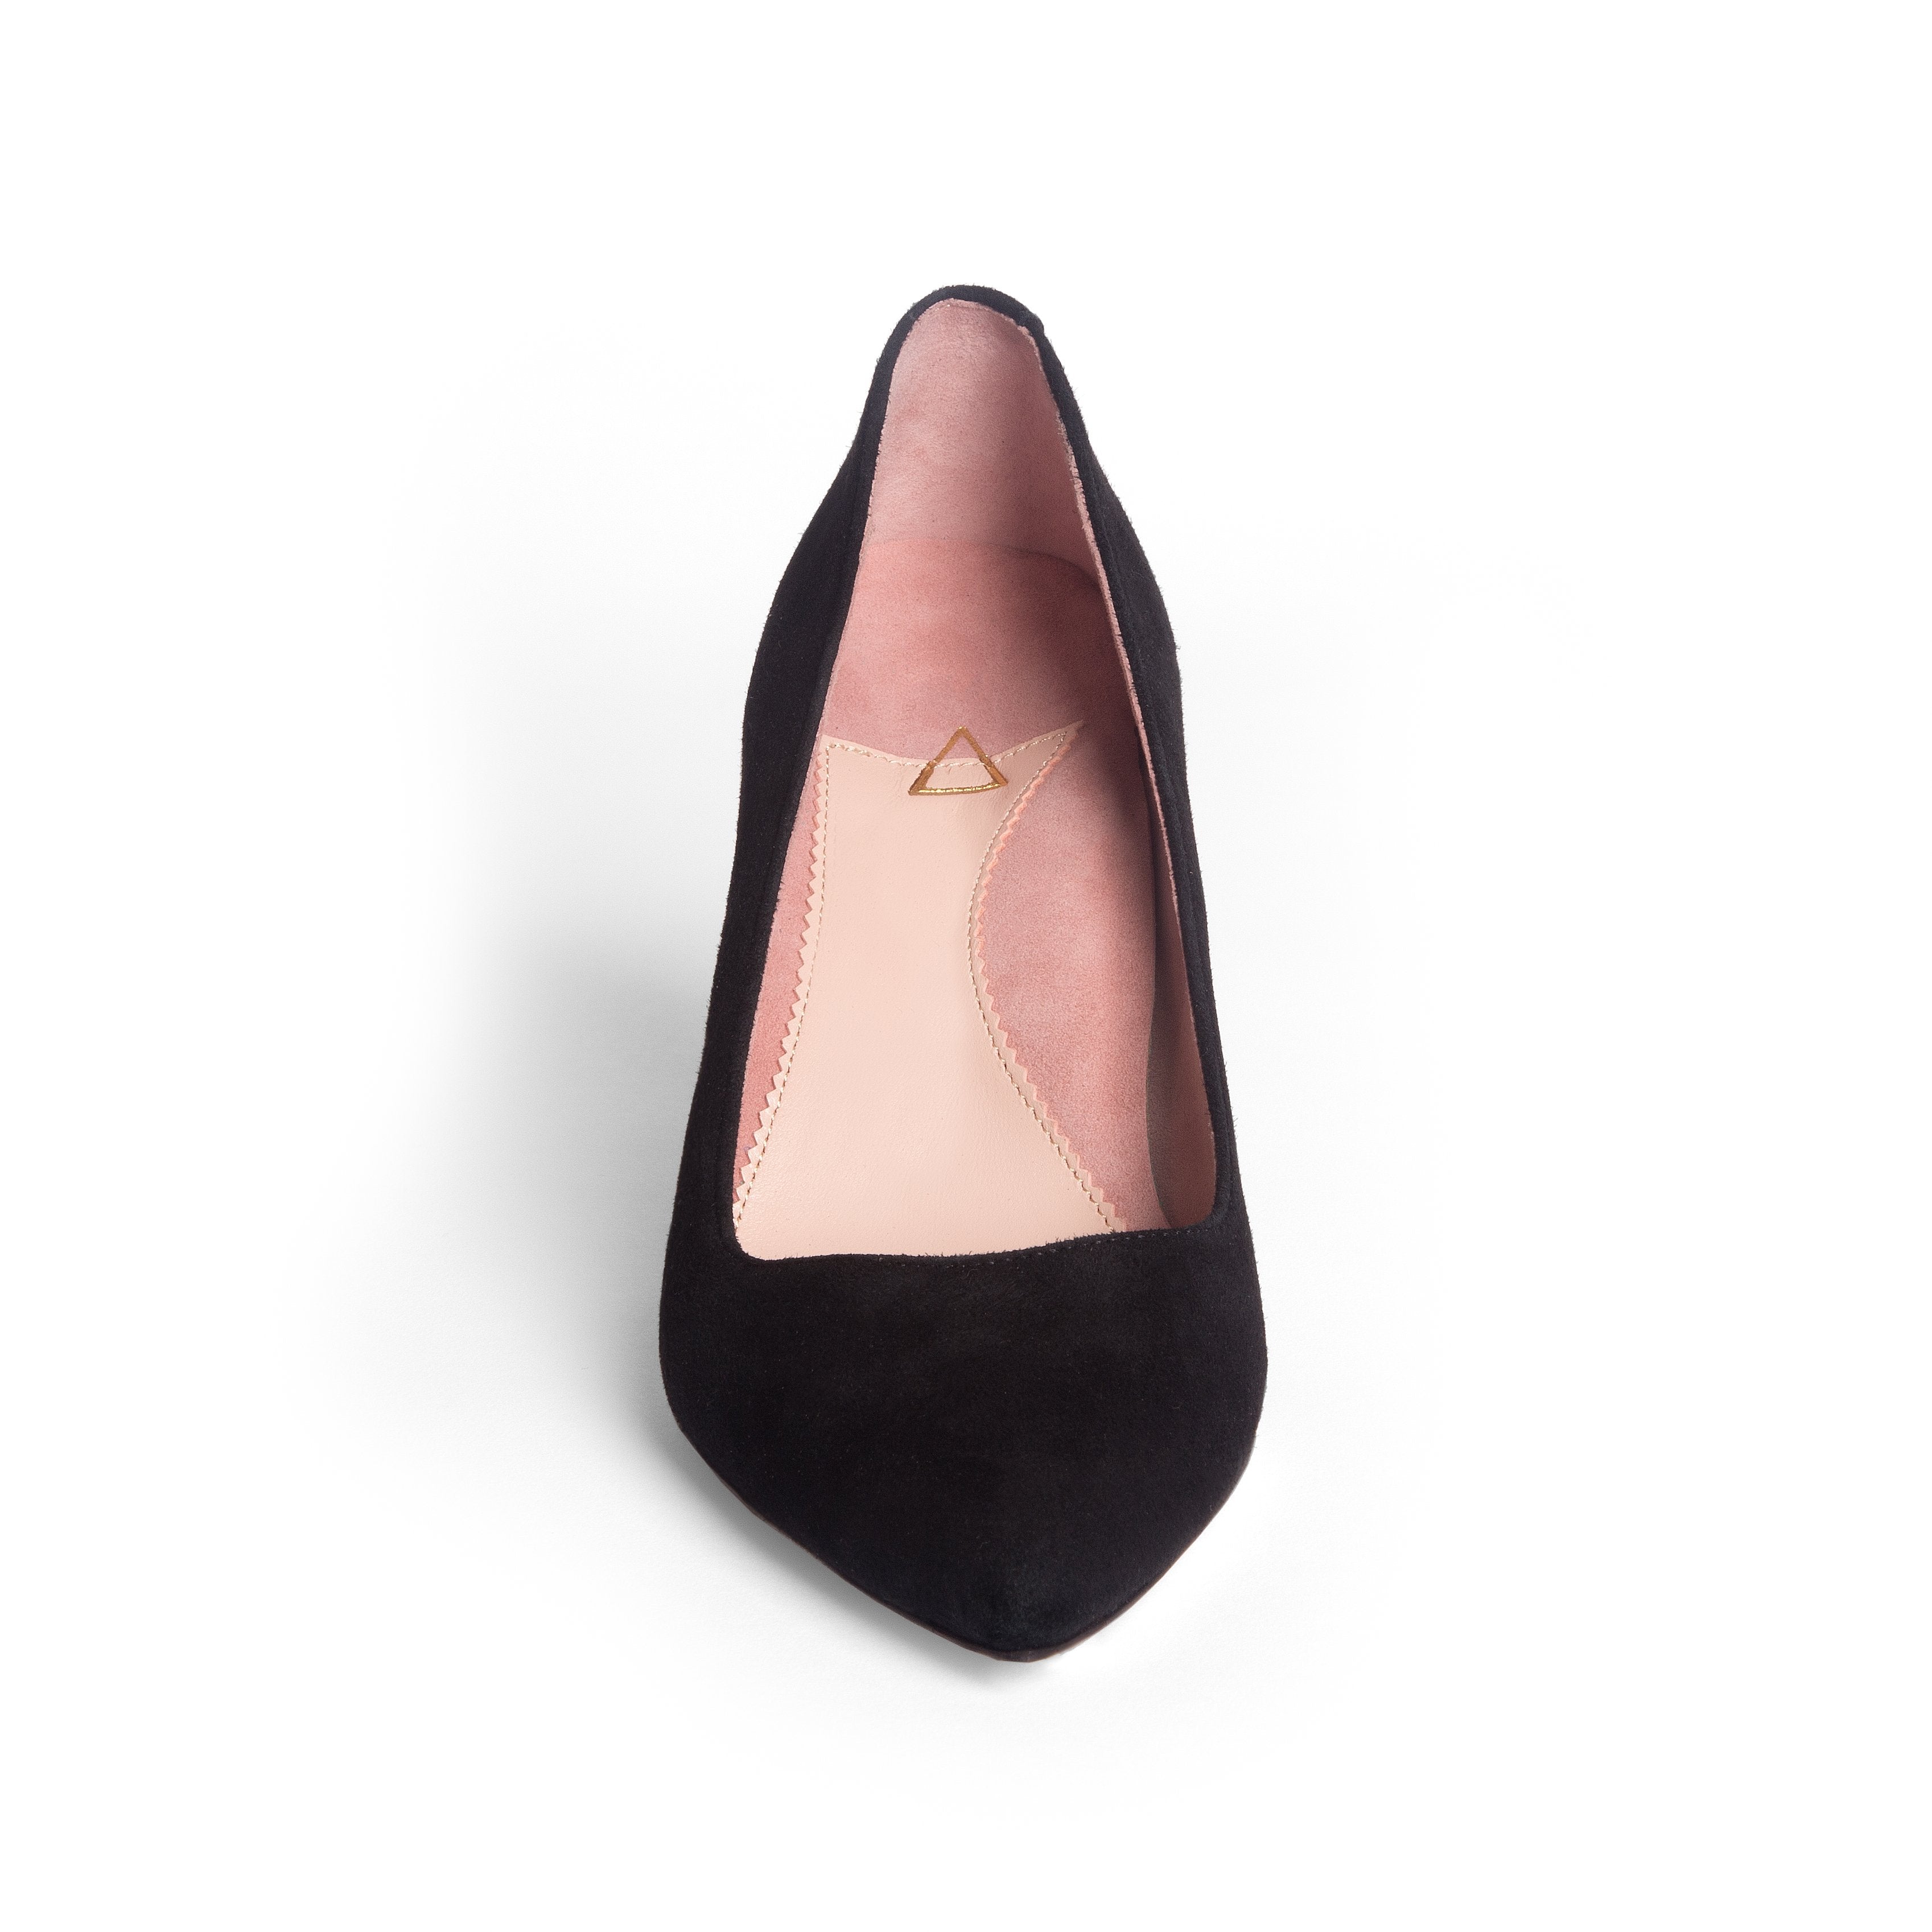 Women' Business Suede Lower Block Heel - Black NORA GARDNER | OFFICIAL STORE for work and office